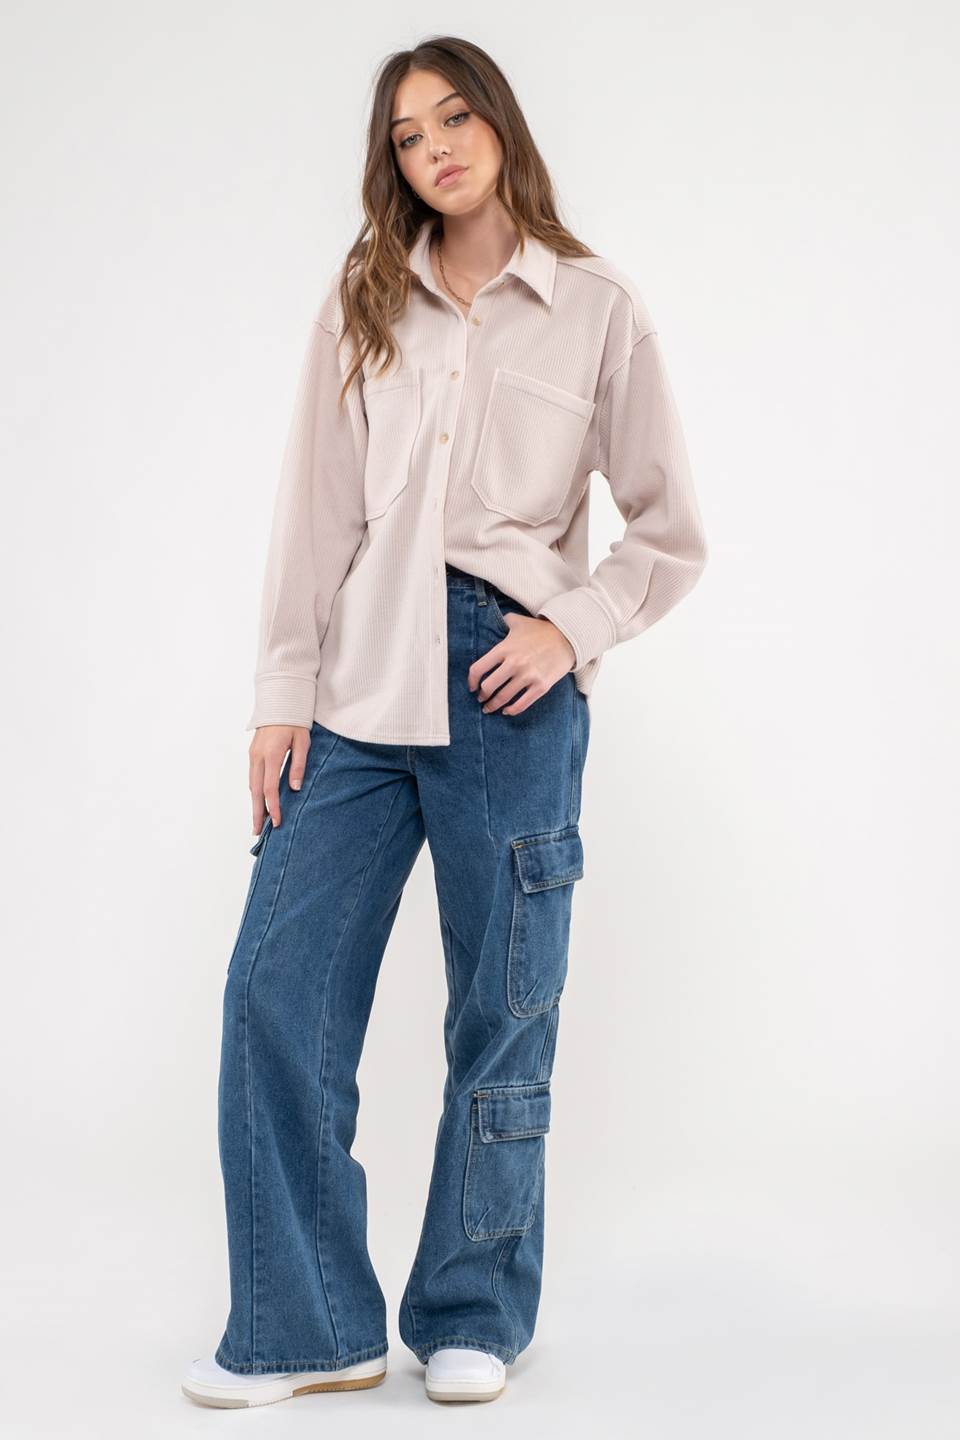 RIB KNIT EXPOSED SEAM BUTTON UP TOP